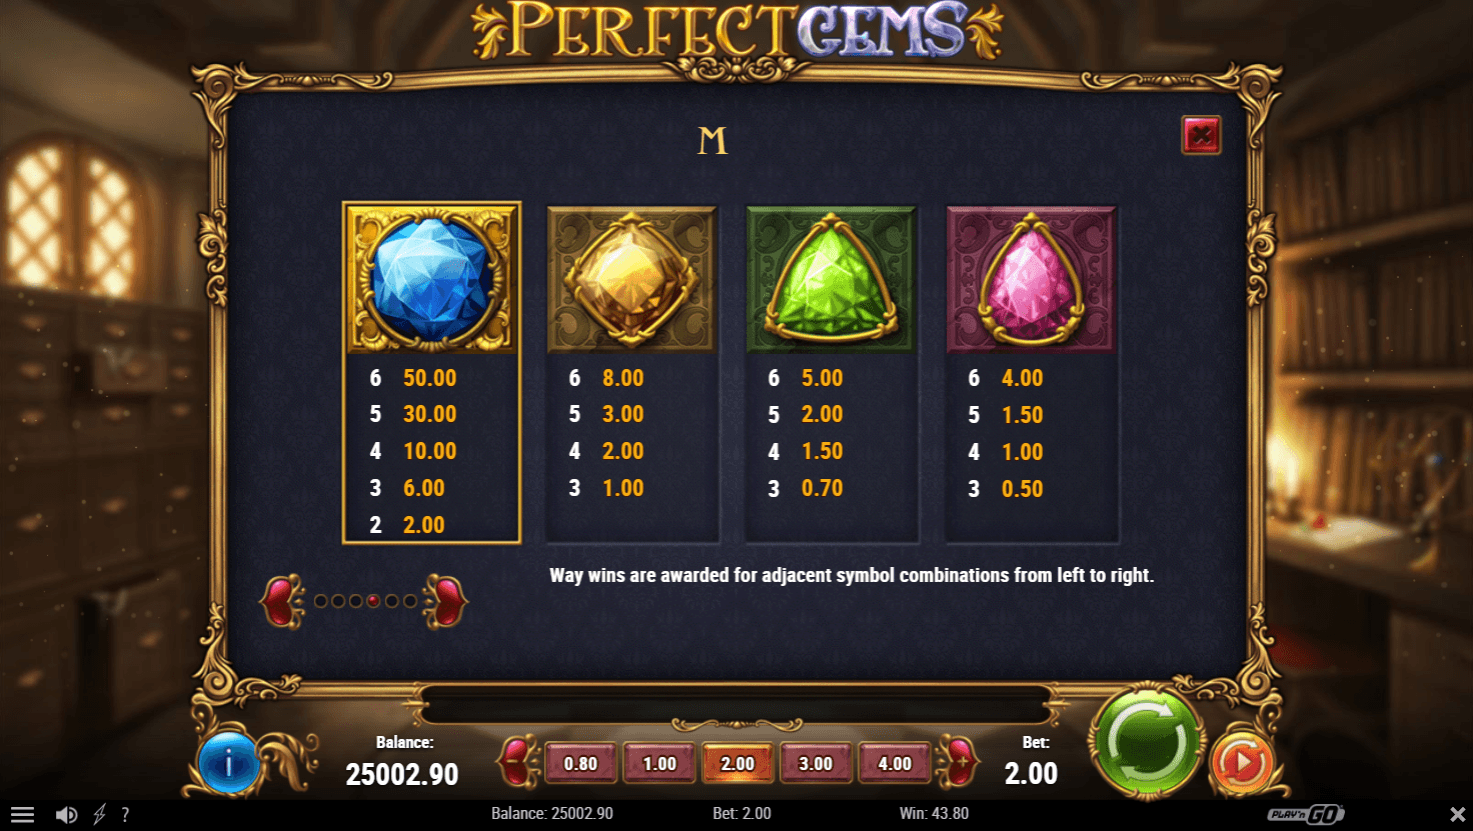 Perfect Gems - PlaynGo Games catalogue | SoftGamings